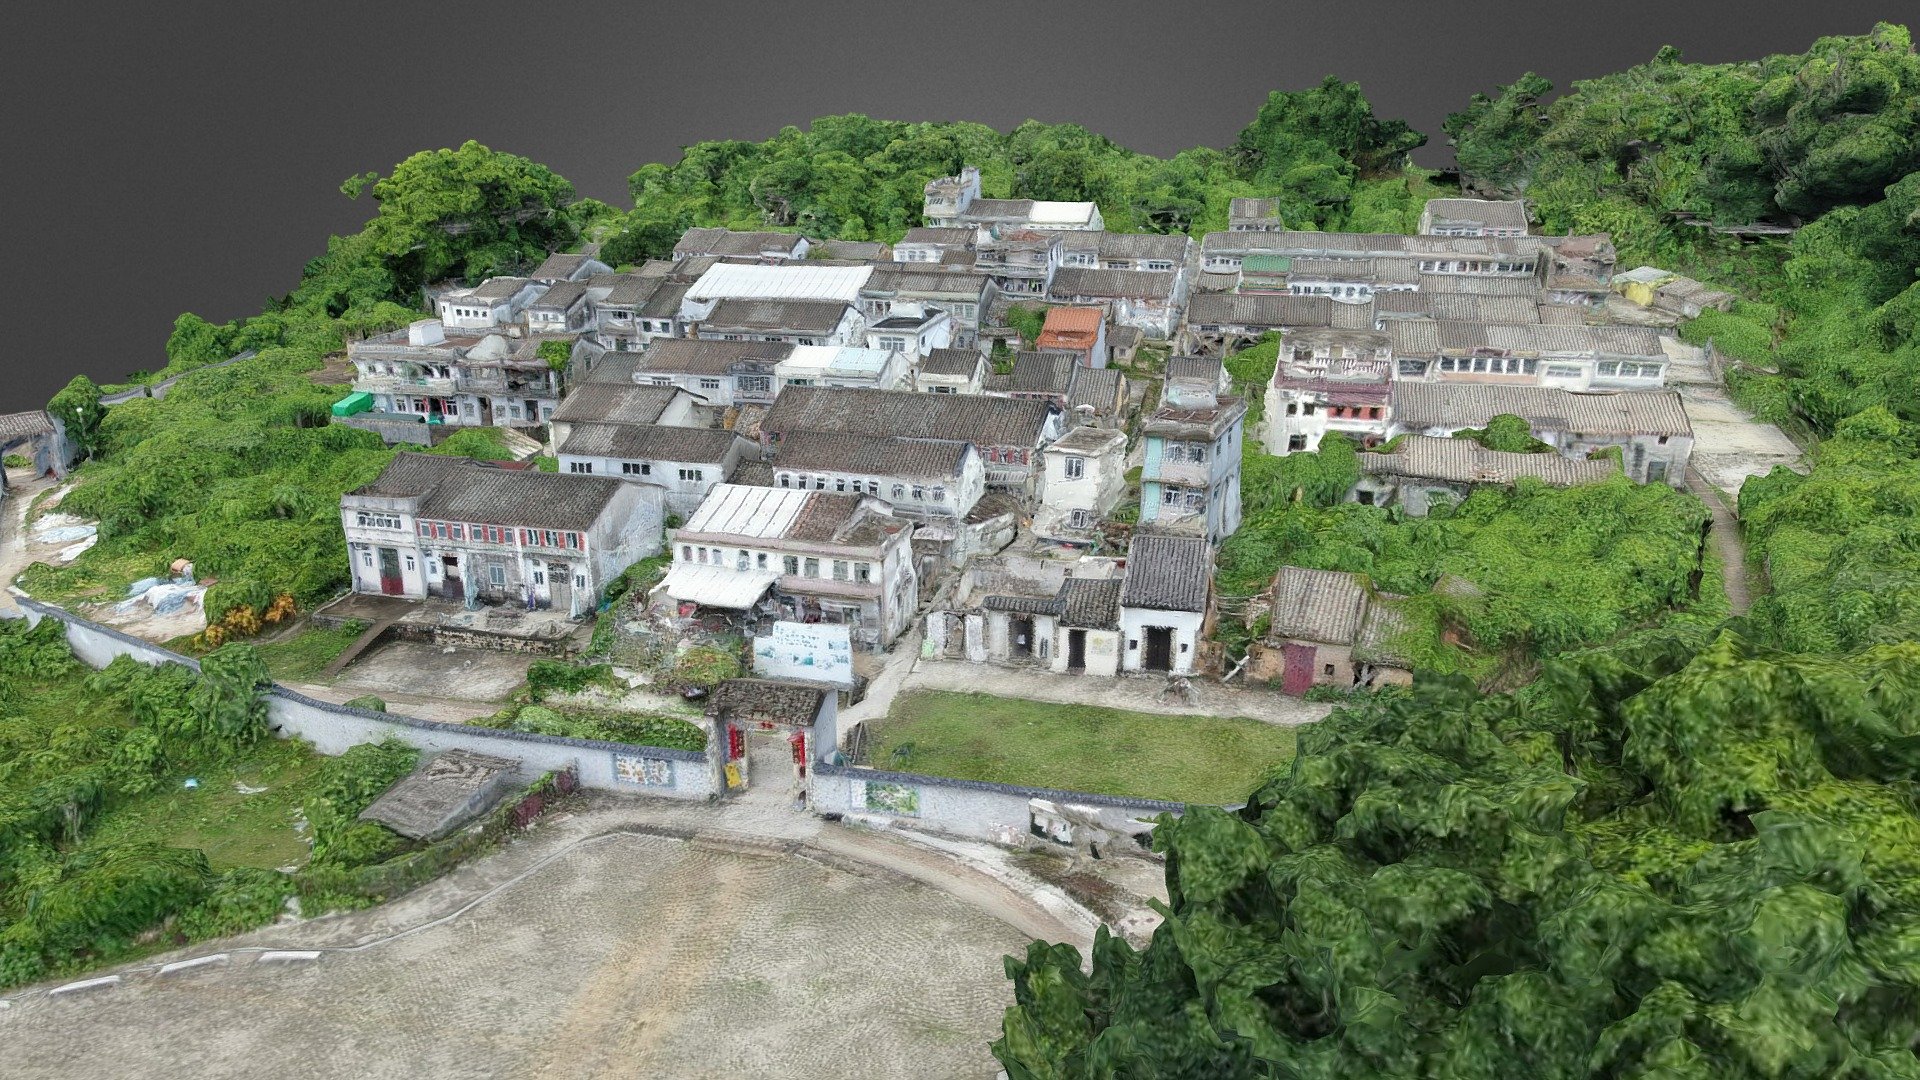 The History of Lai Chi Wo dated back to 400 years ago before the Hakka people settled there.[6] It was once a prosperous Hakka walled-village in the North-Eastern part of New Territories. There were around 500-600 residents in the most prosperous period 3d model